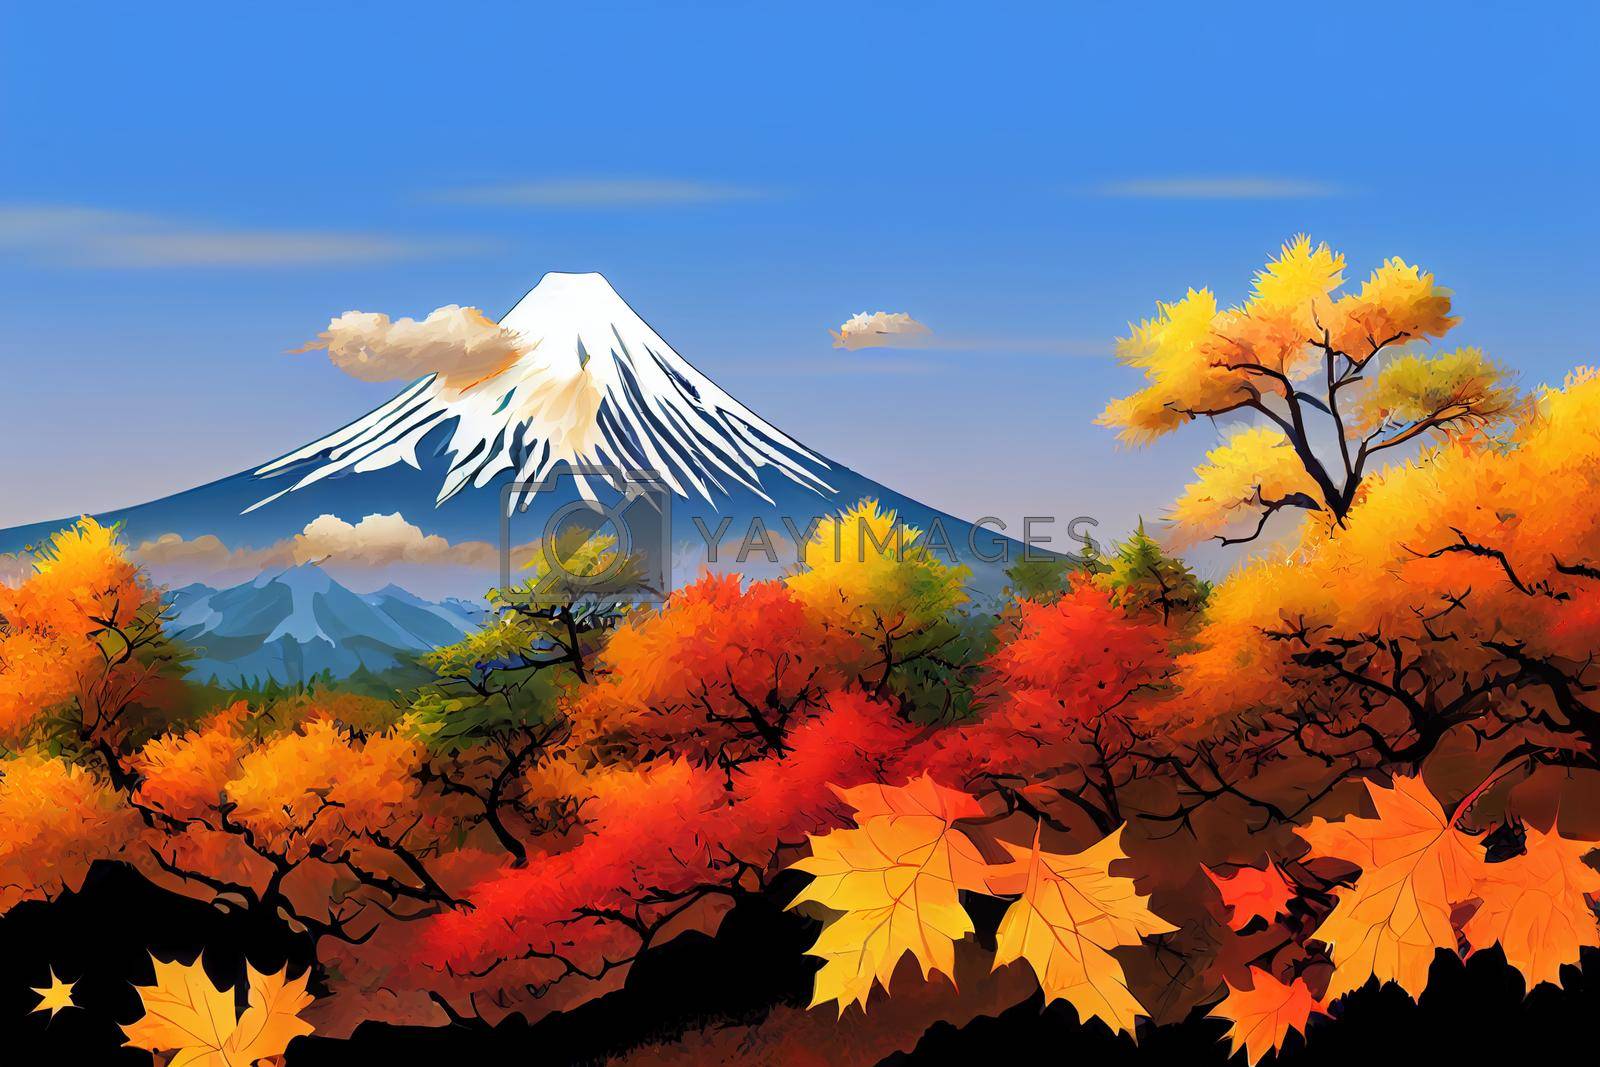 Royalty free image of Mt, Fuji with fall colors in Japan, anime style by 2ragon